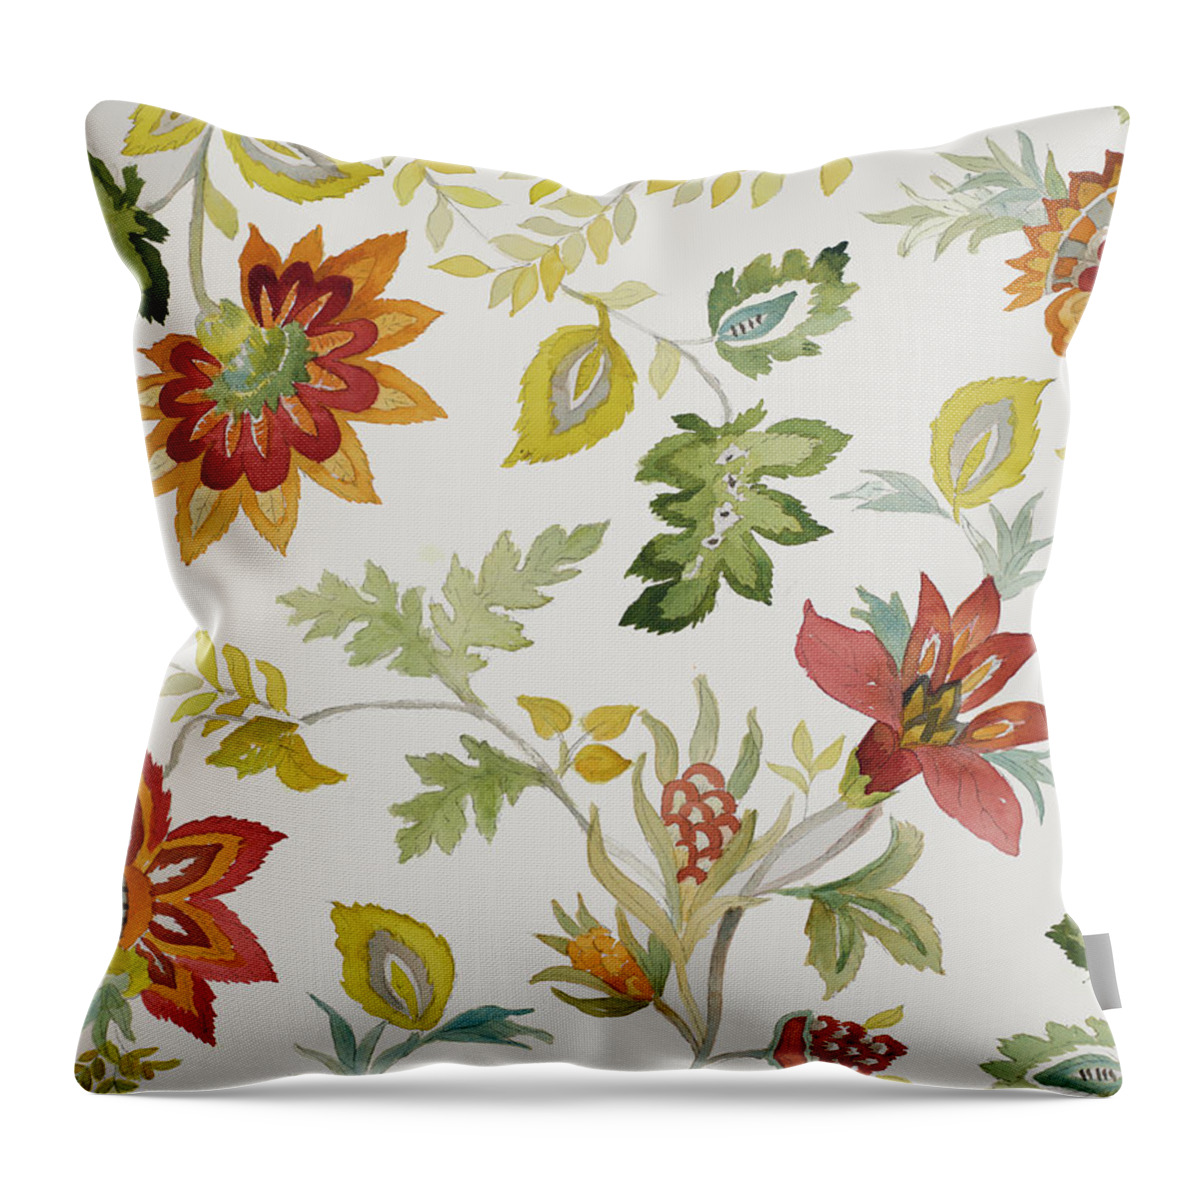 Festive Throw Pillow featuring the painting Festive Harvest #1 by Lanie Loreth